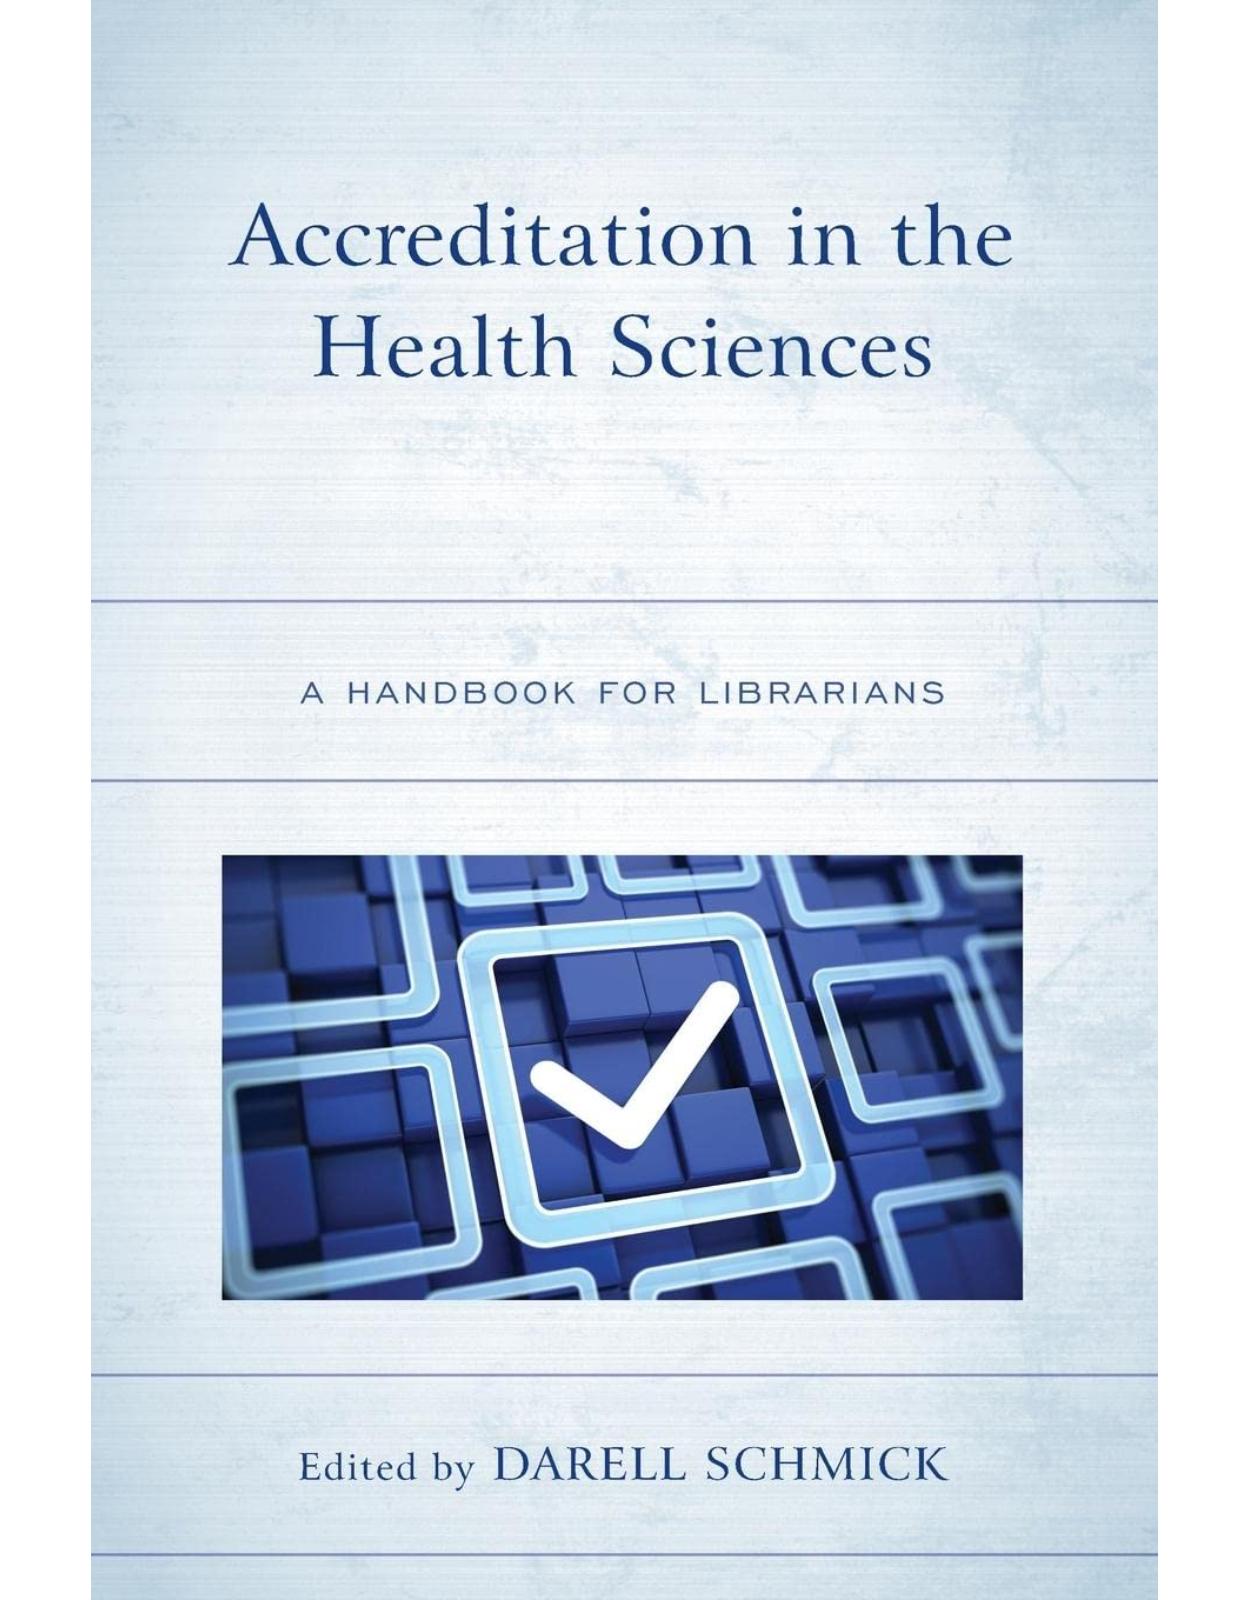 Accreditation in the Health Sciences